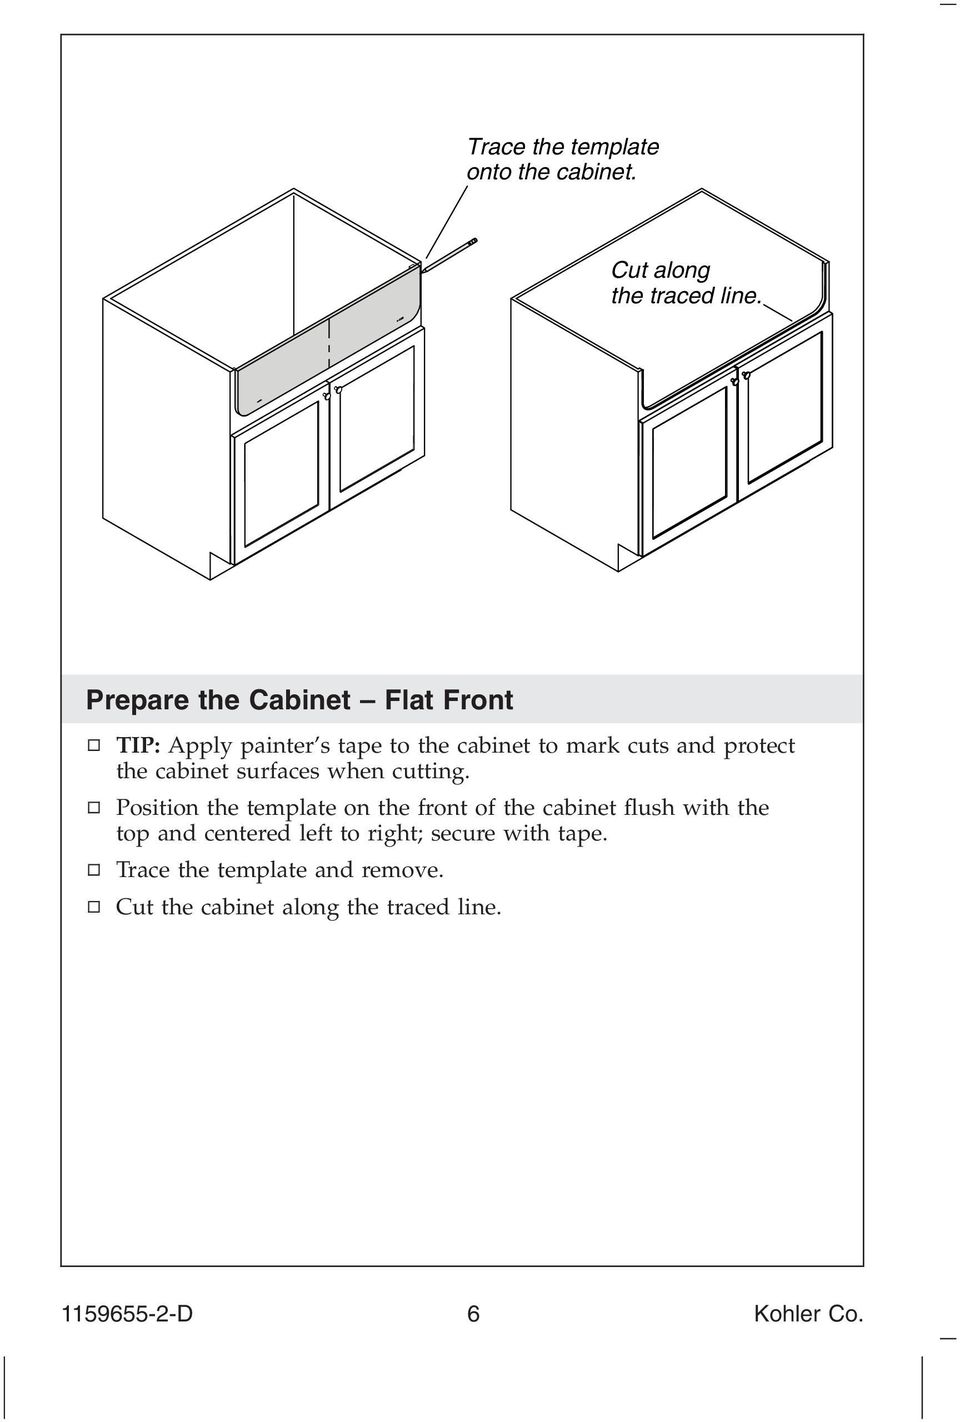 cabinet surfaces when cutting.